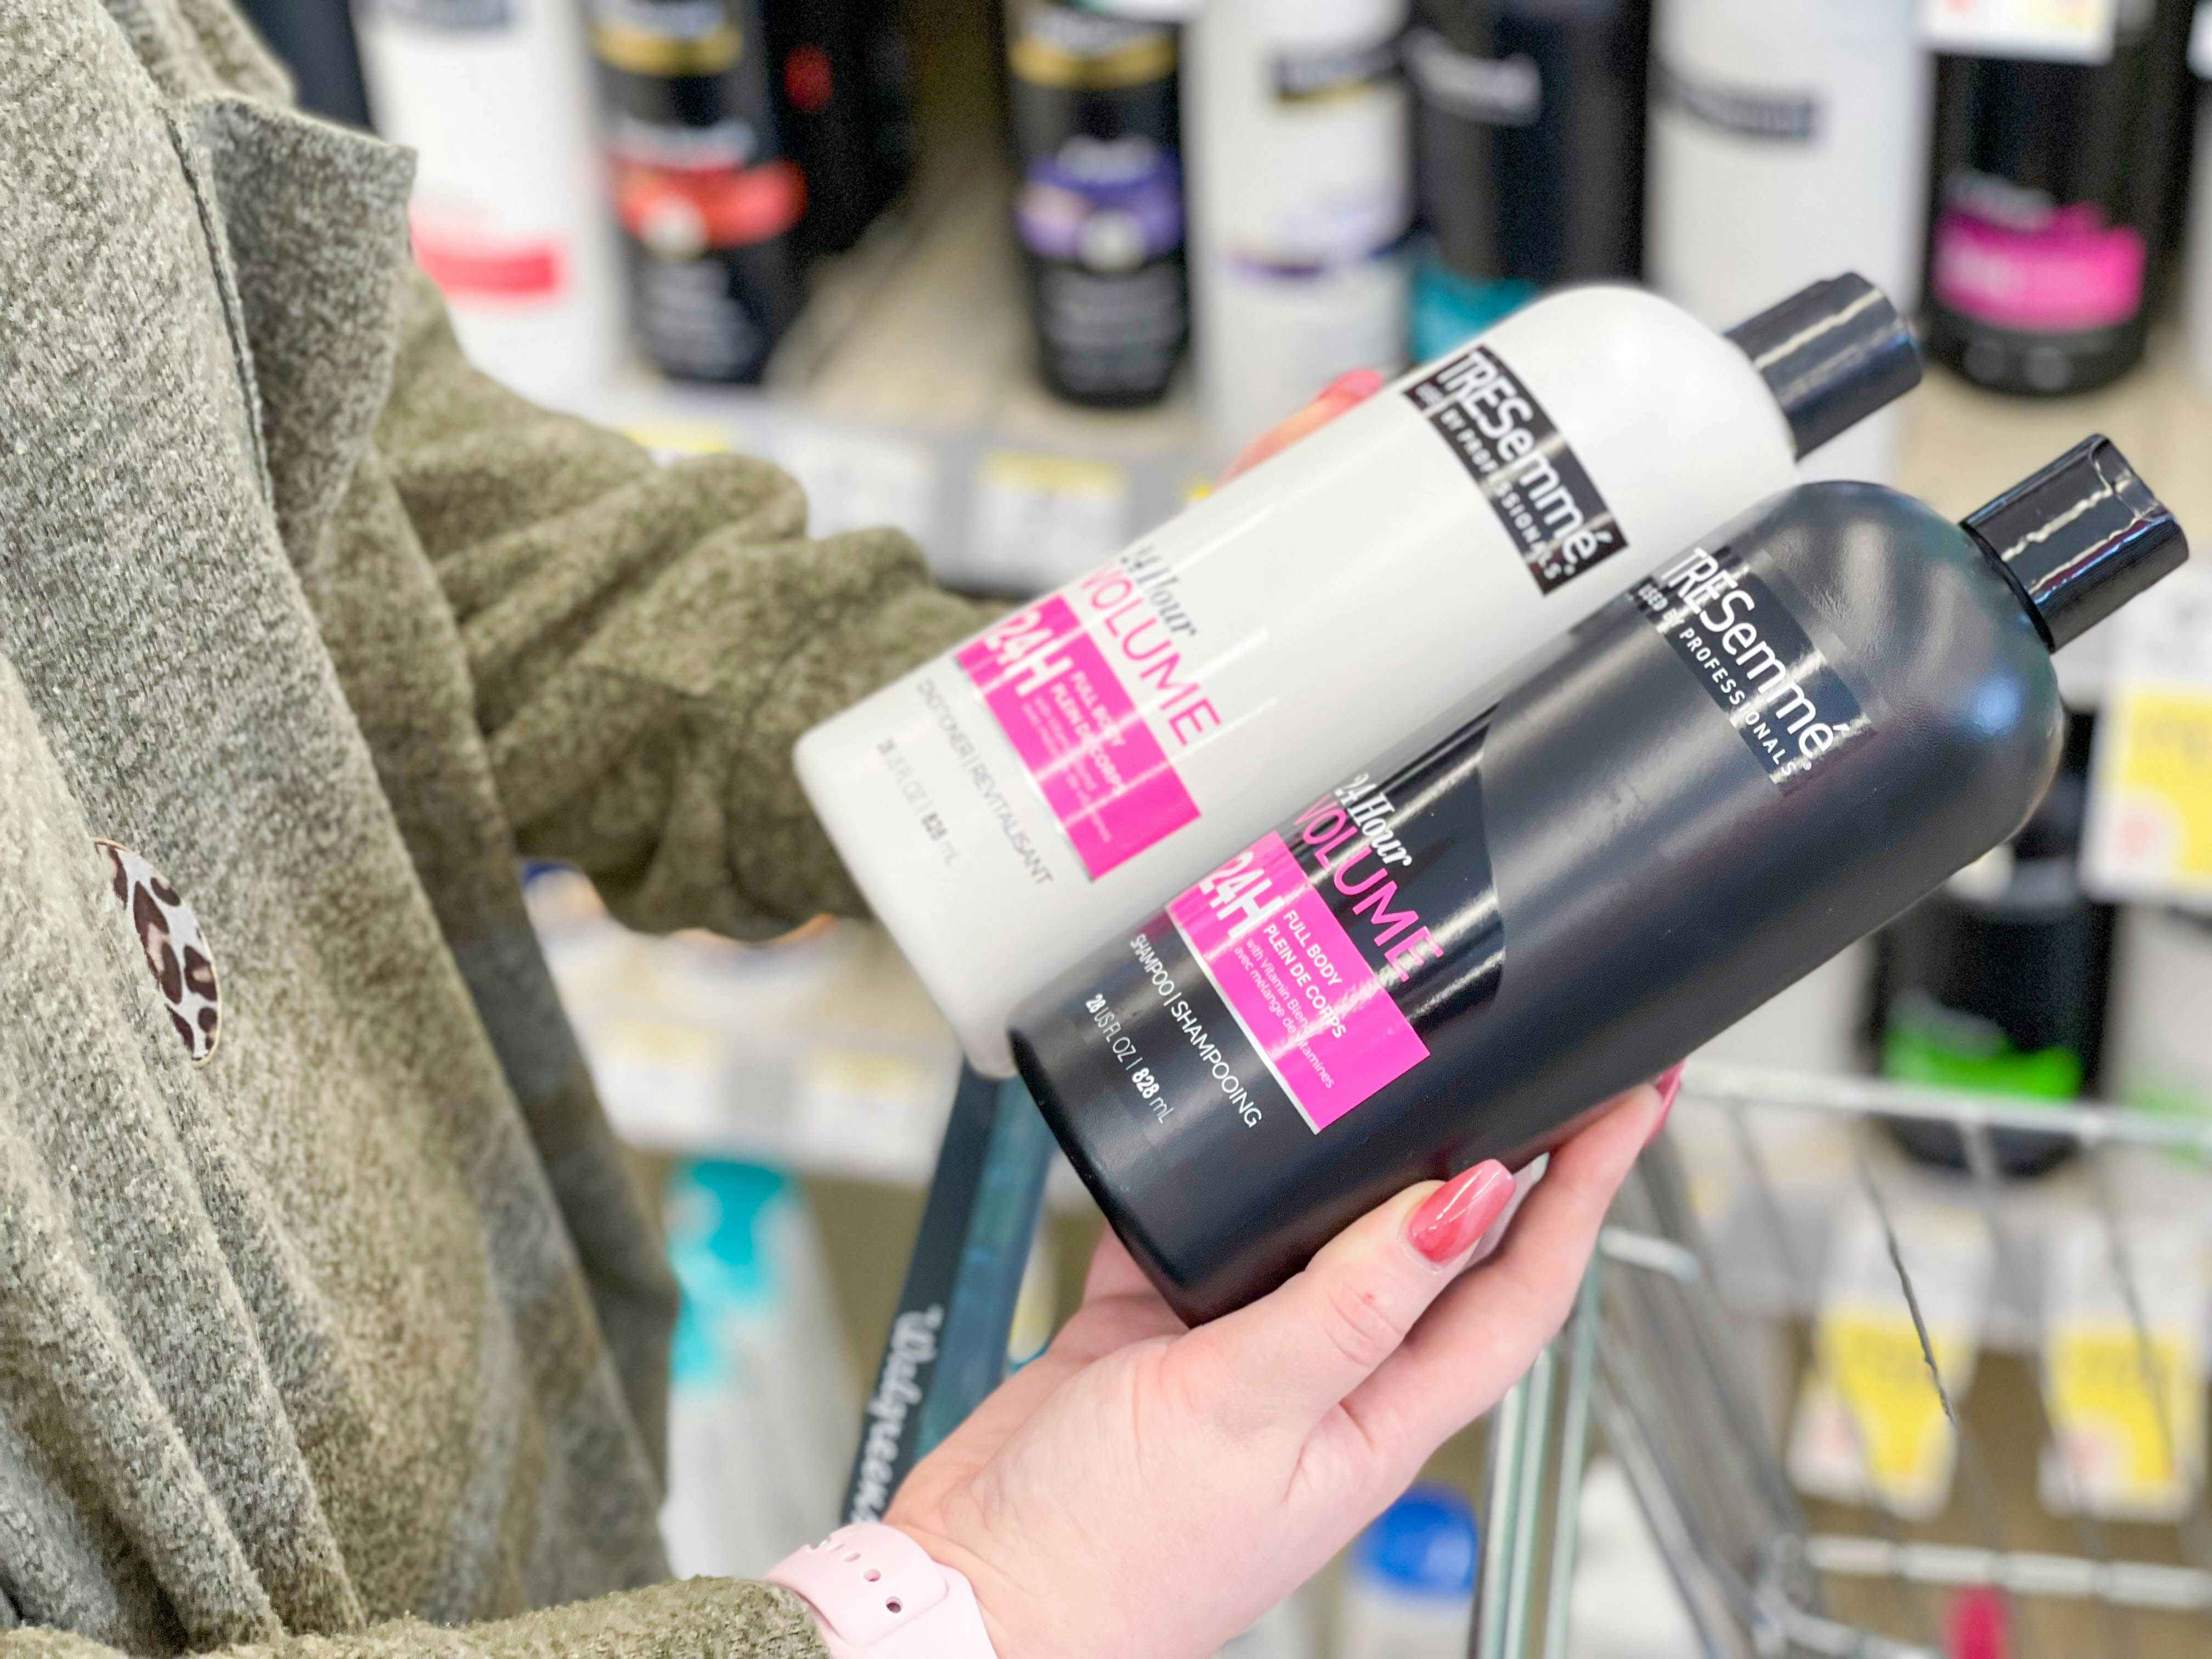 A person holding bottles of TRESemme shampoo and conditioner in the hair care aisle of Walgreens.